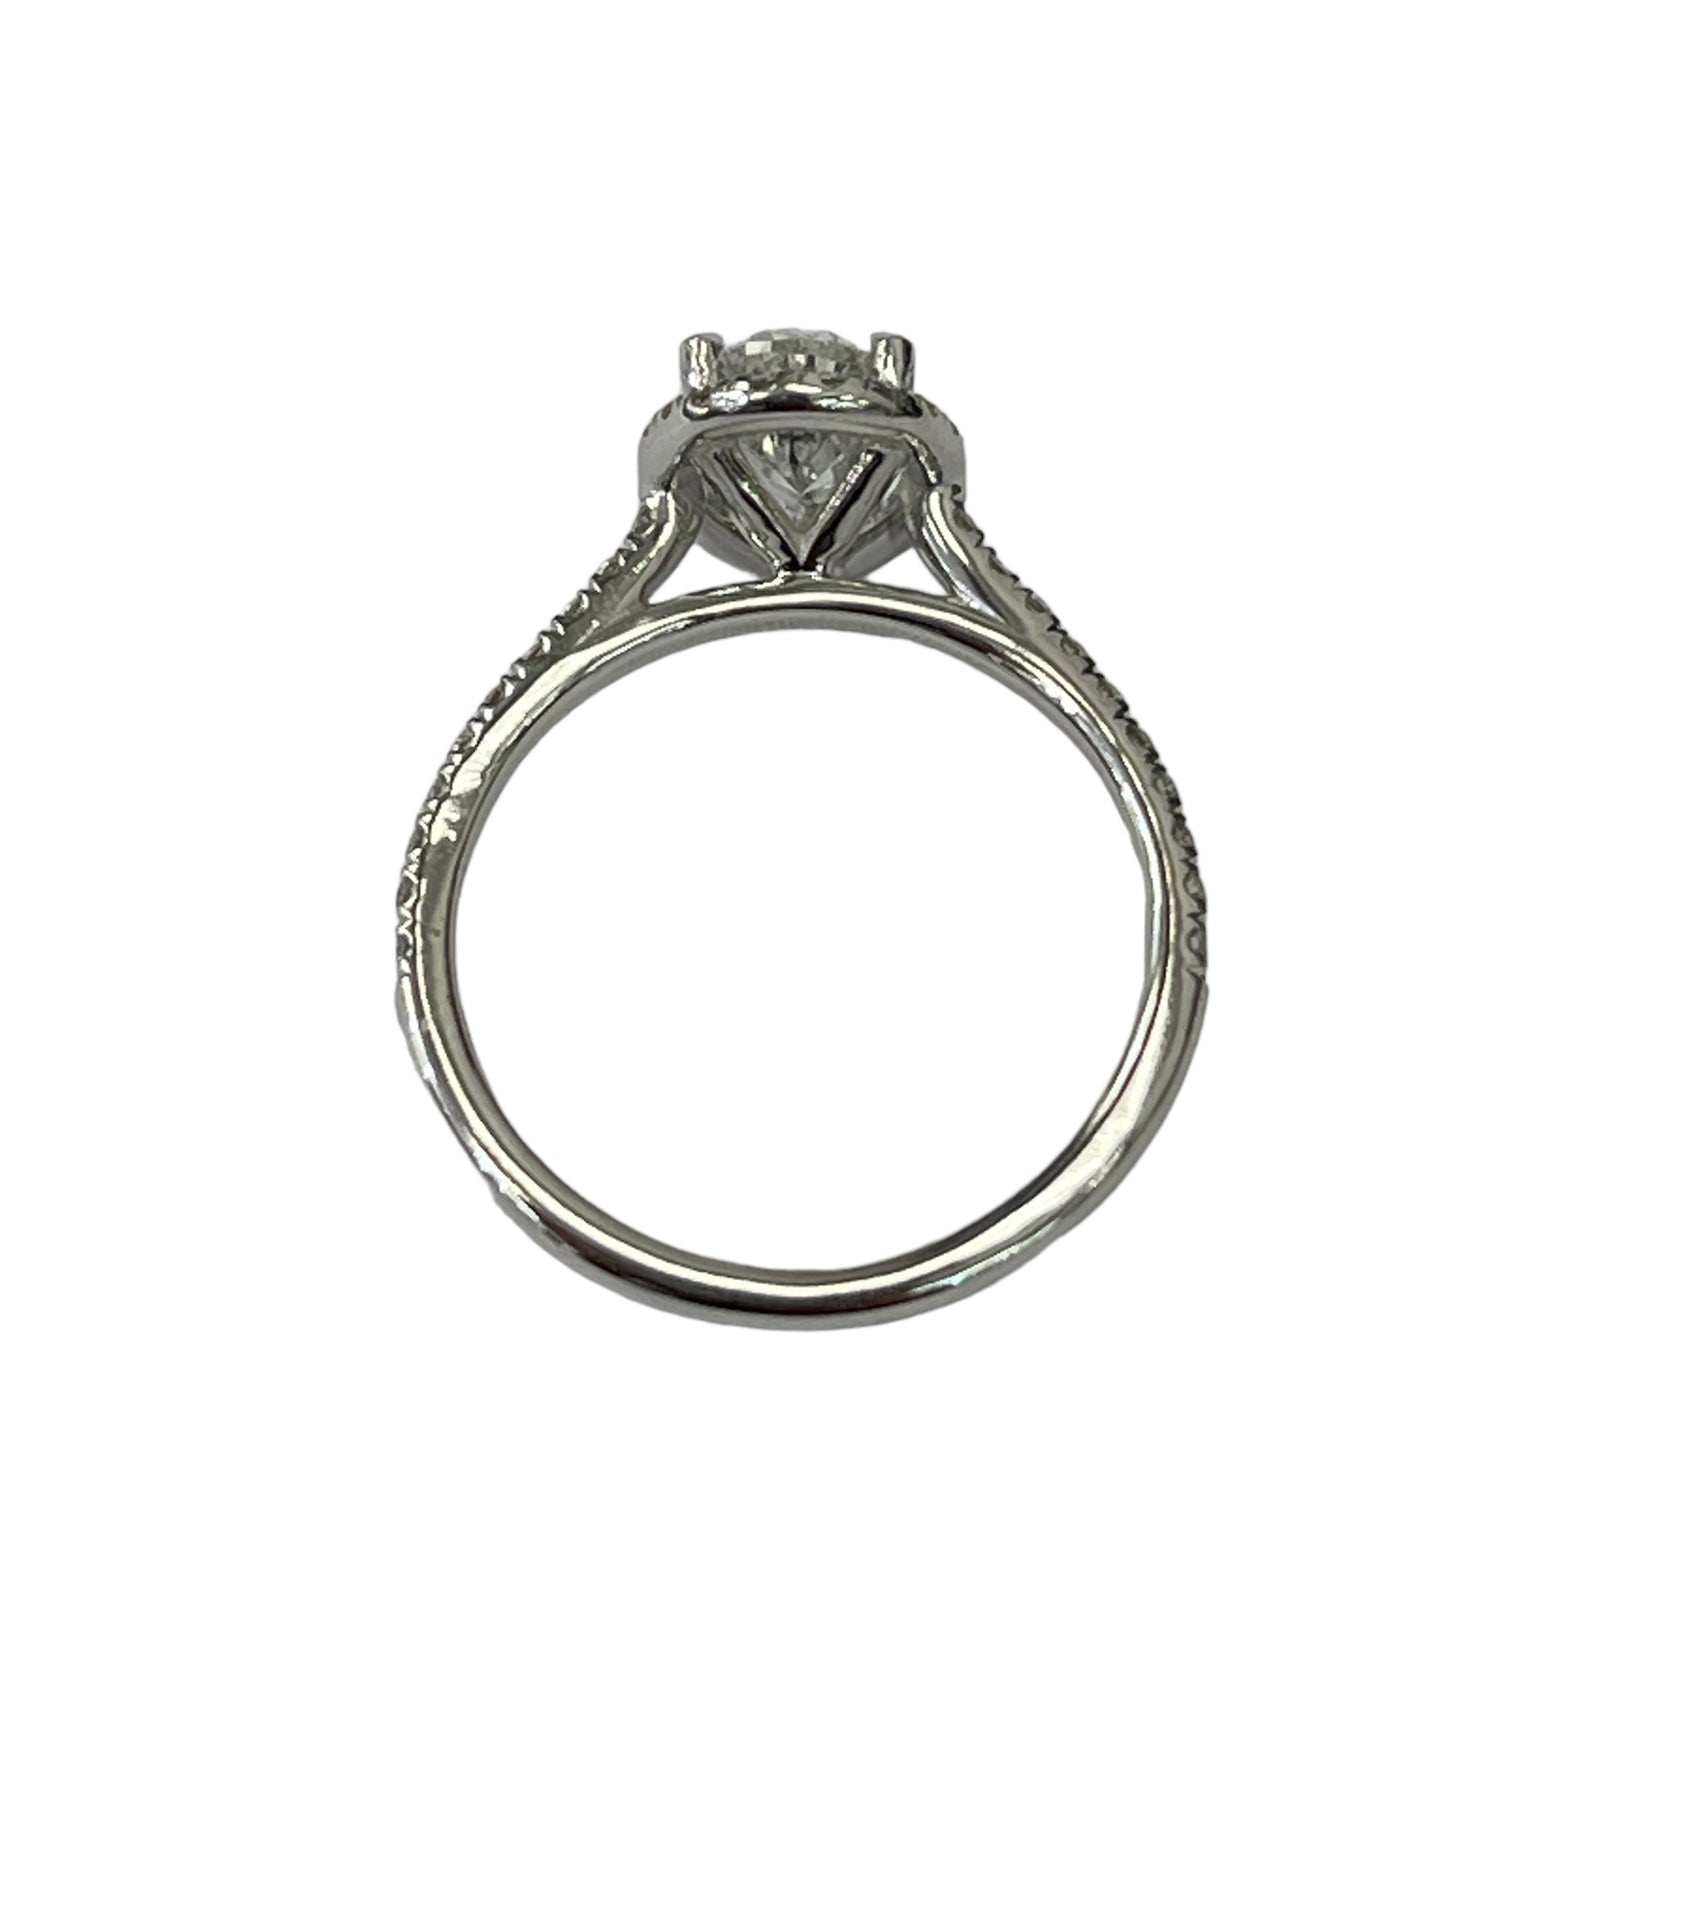 Pear Brilliant Halo Diamond Engagement Ring GIA Certified White Gold